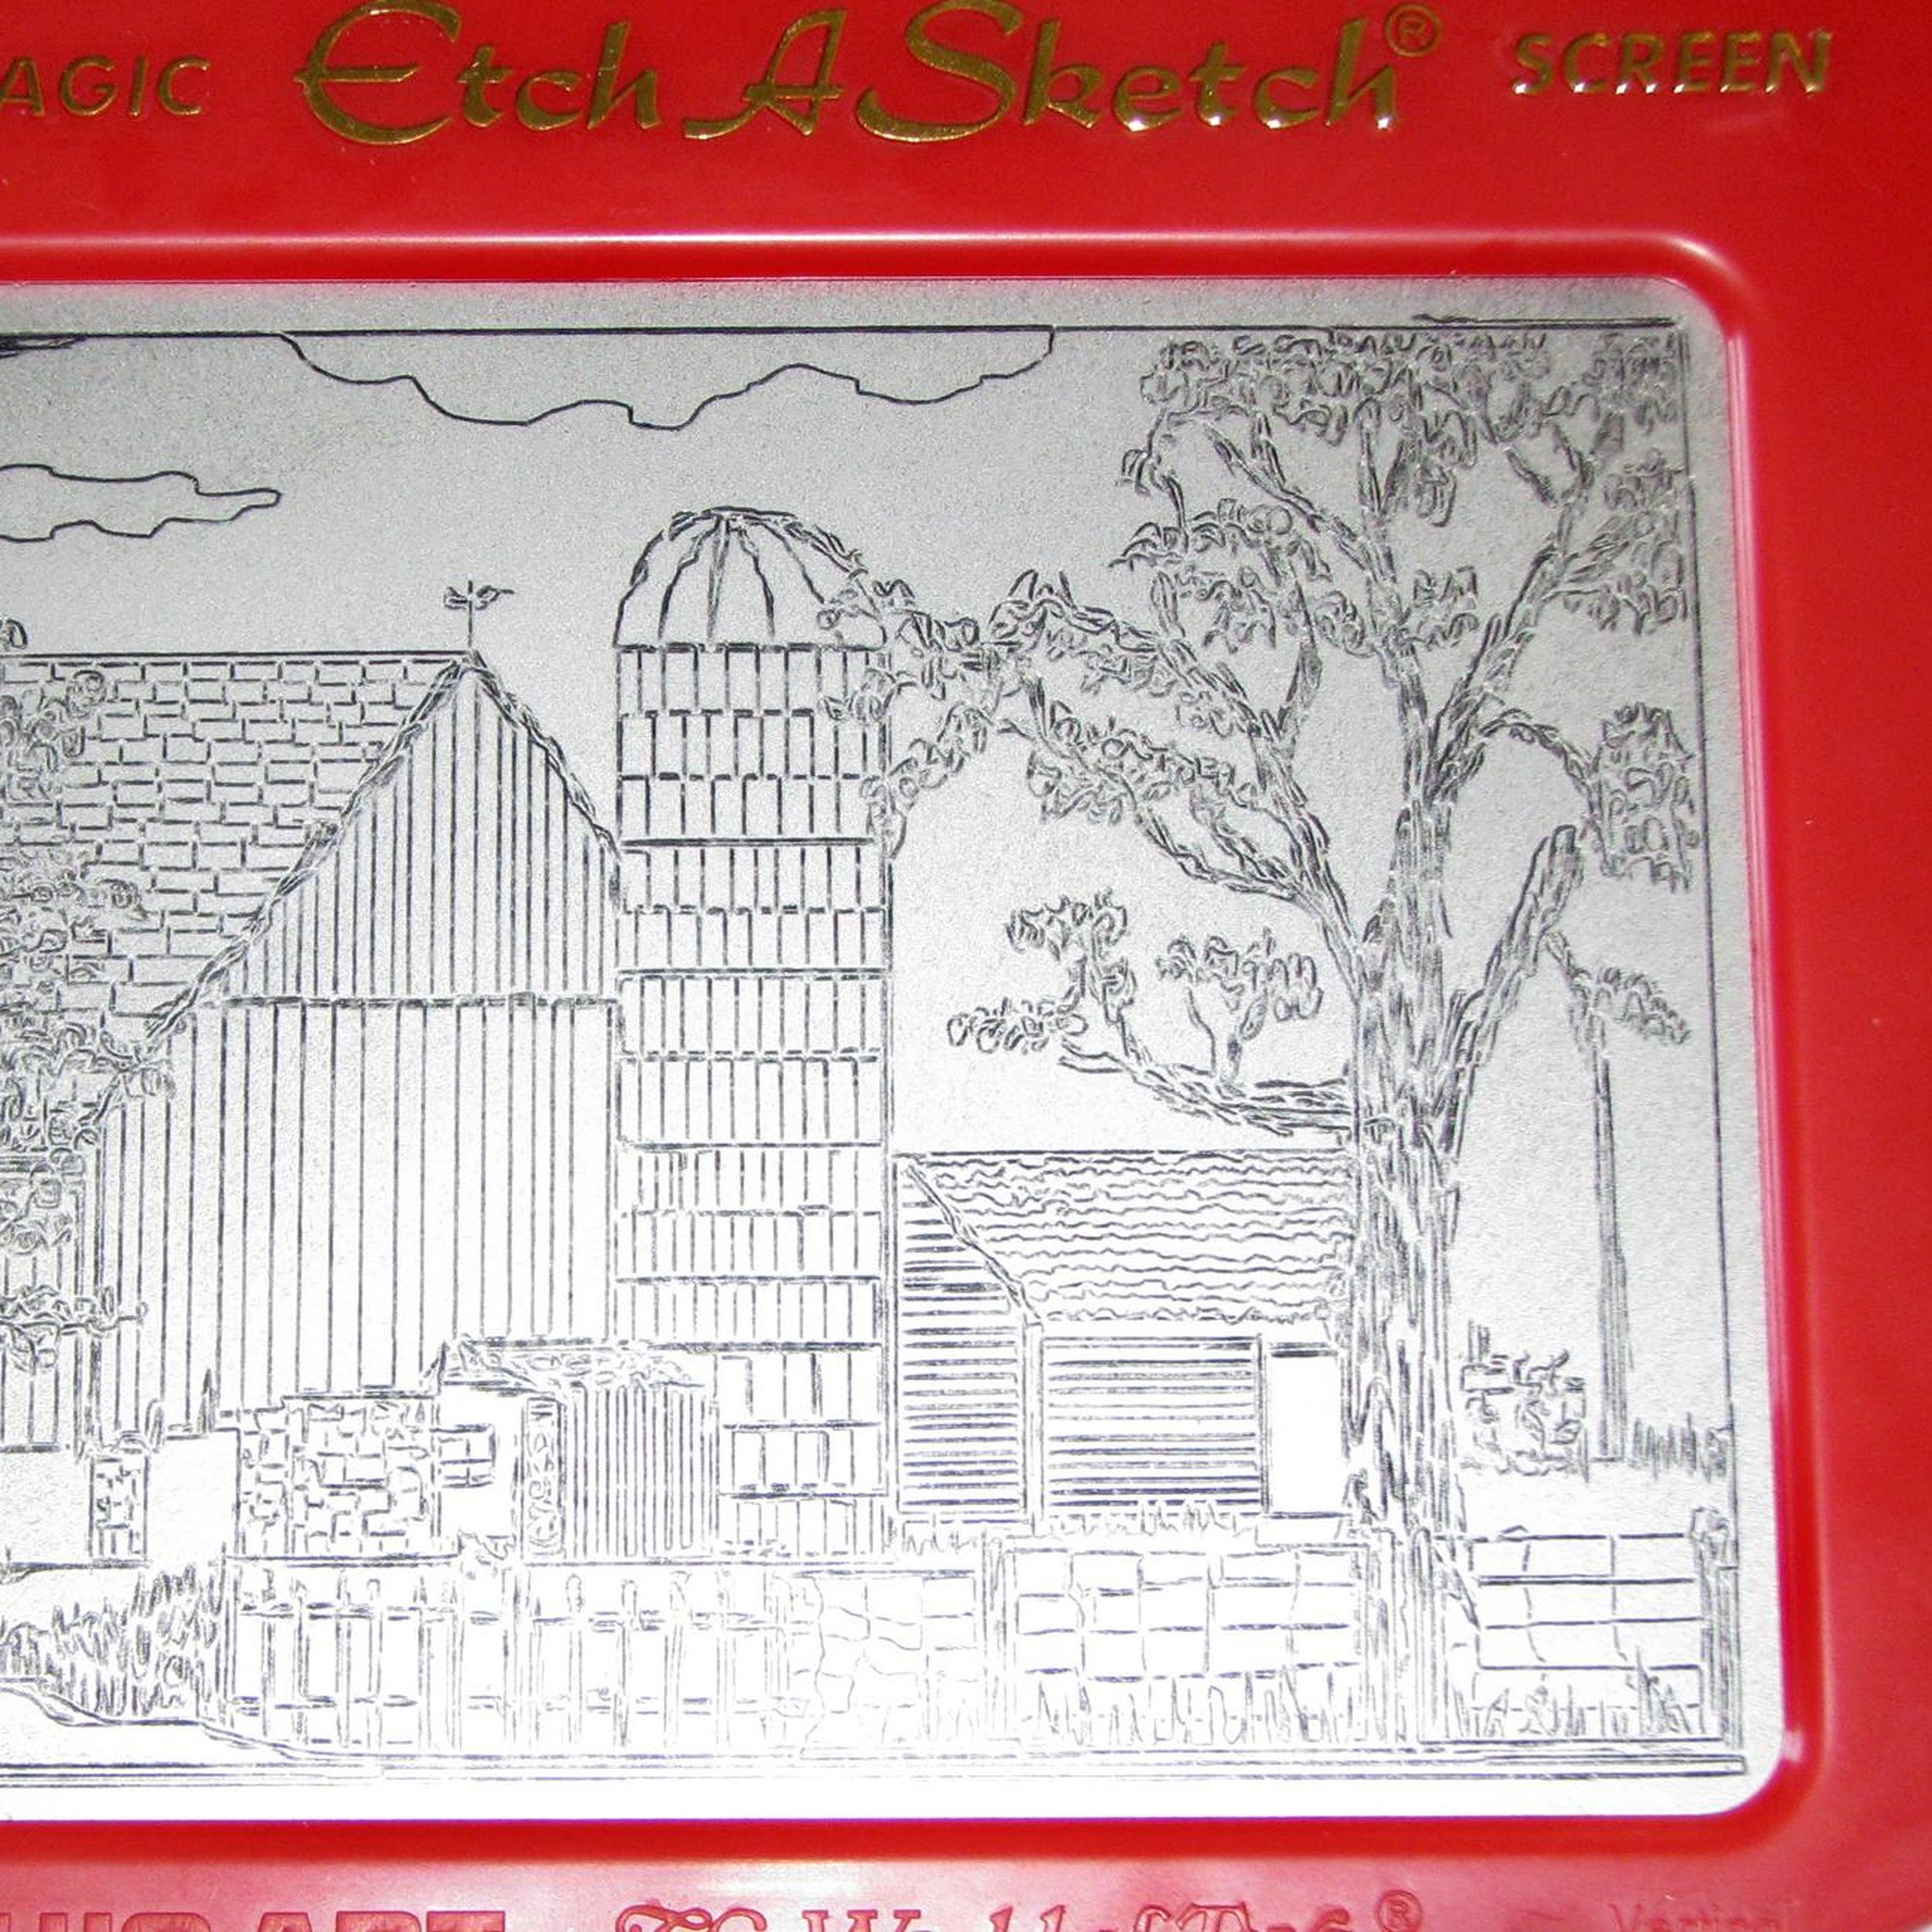 Etch A Sketch owner sells classic toy to Toronto company